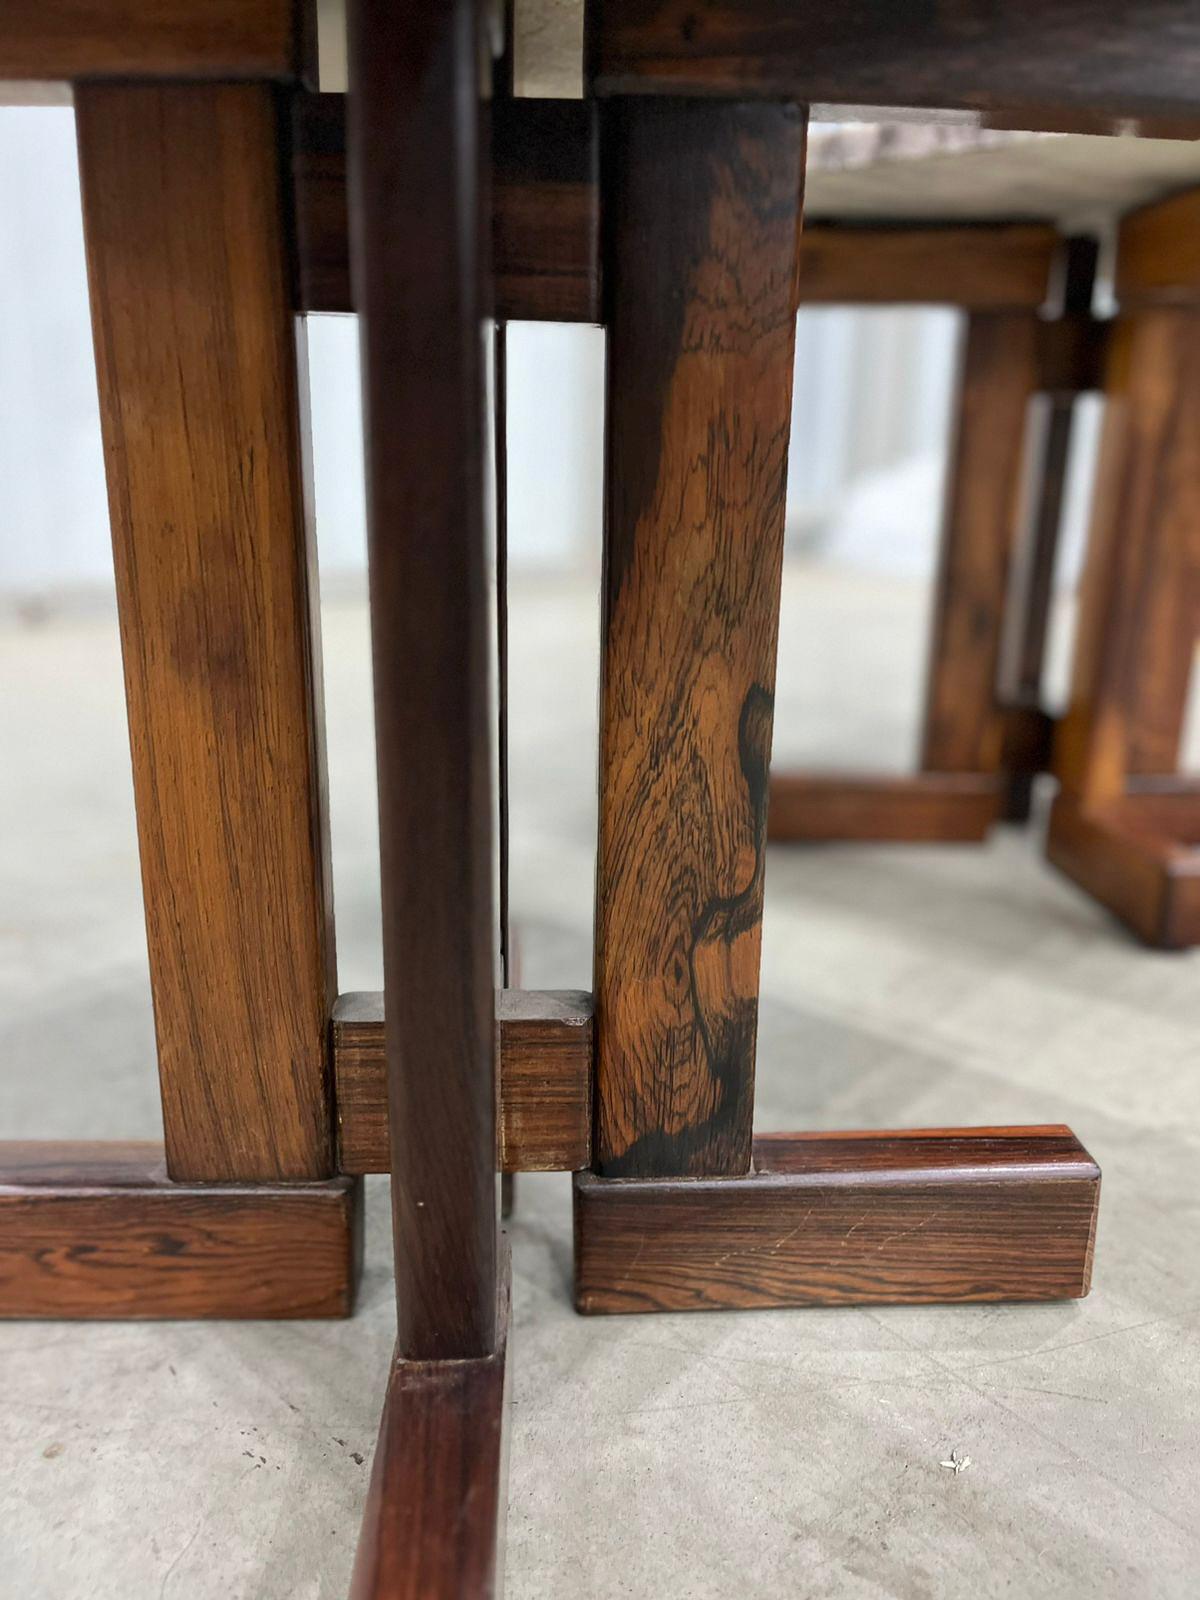 Brazilian Modern Pair of Side Tables in Rosewood and Granite by Celina, c. 1960 For Sale 5